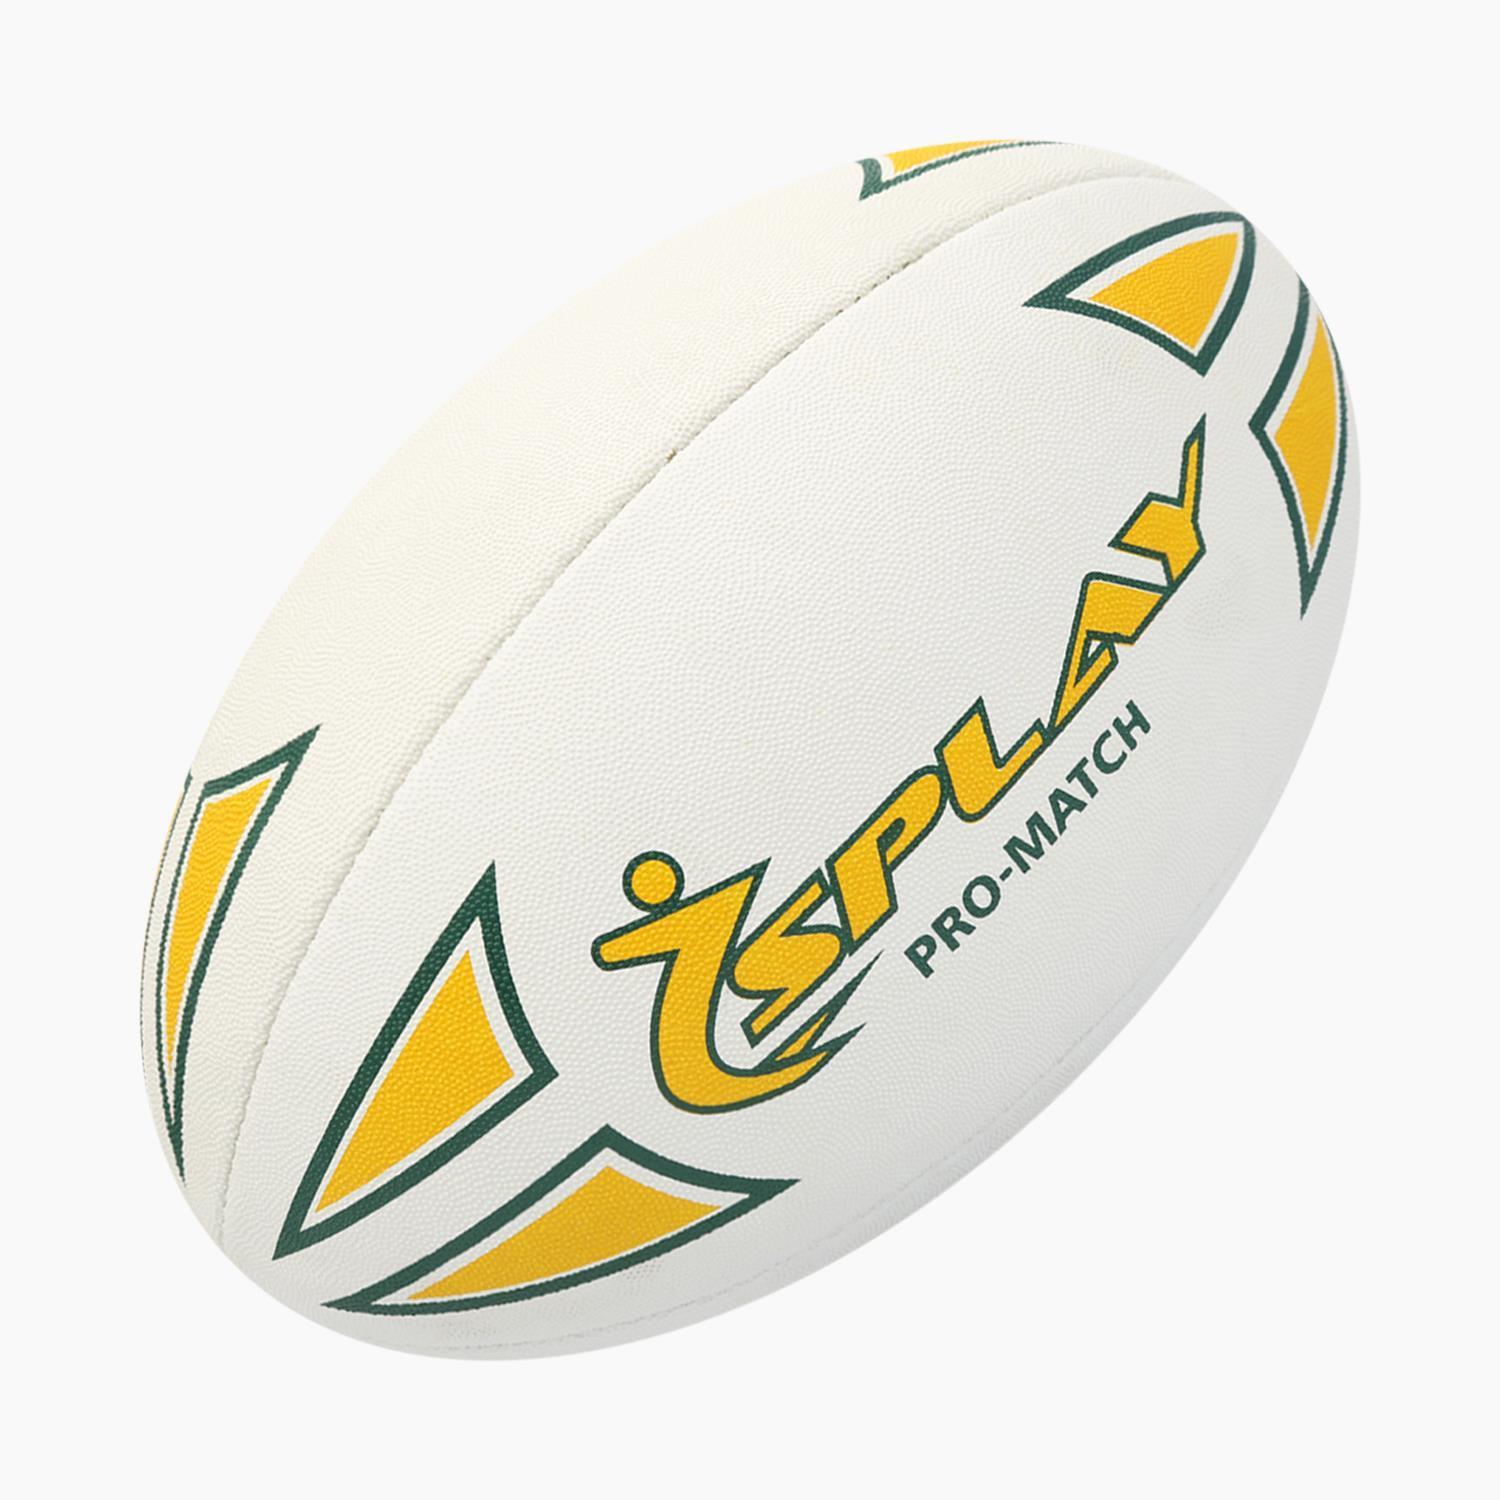 Buy Splay Rugby Pro Match - Size 5-Rugby-Splay (UK) Limited-Splay UK Online